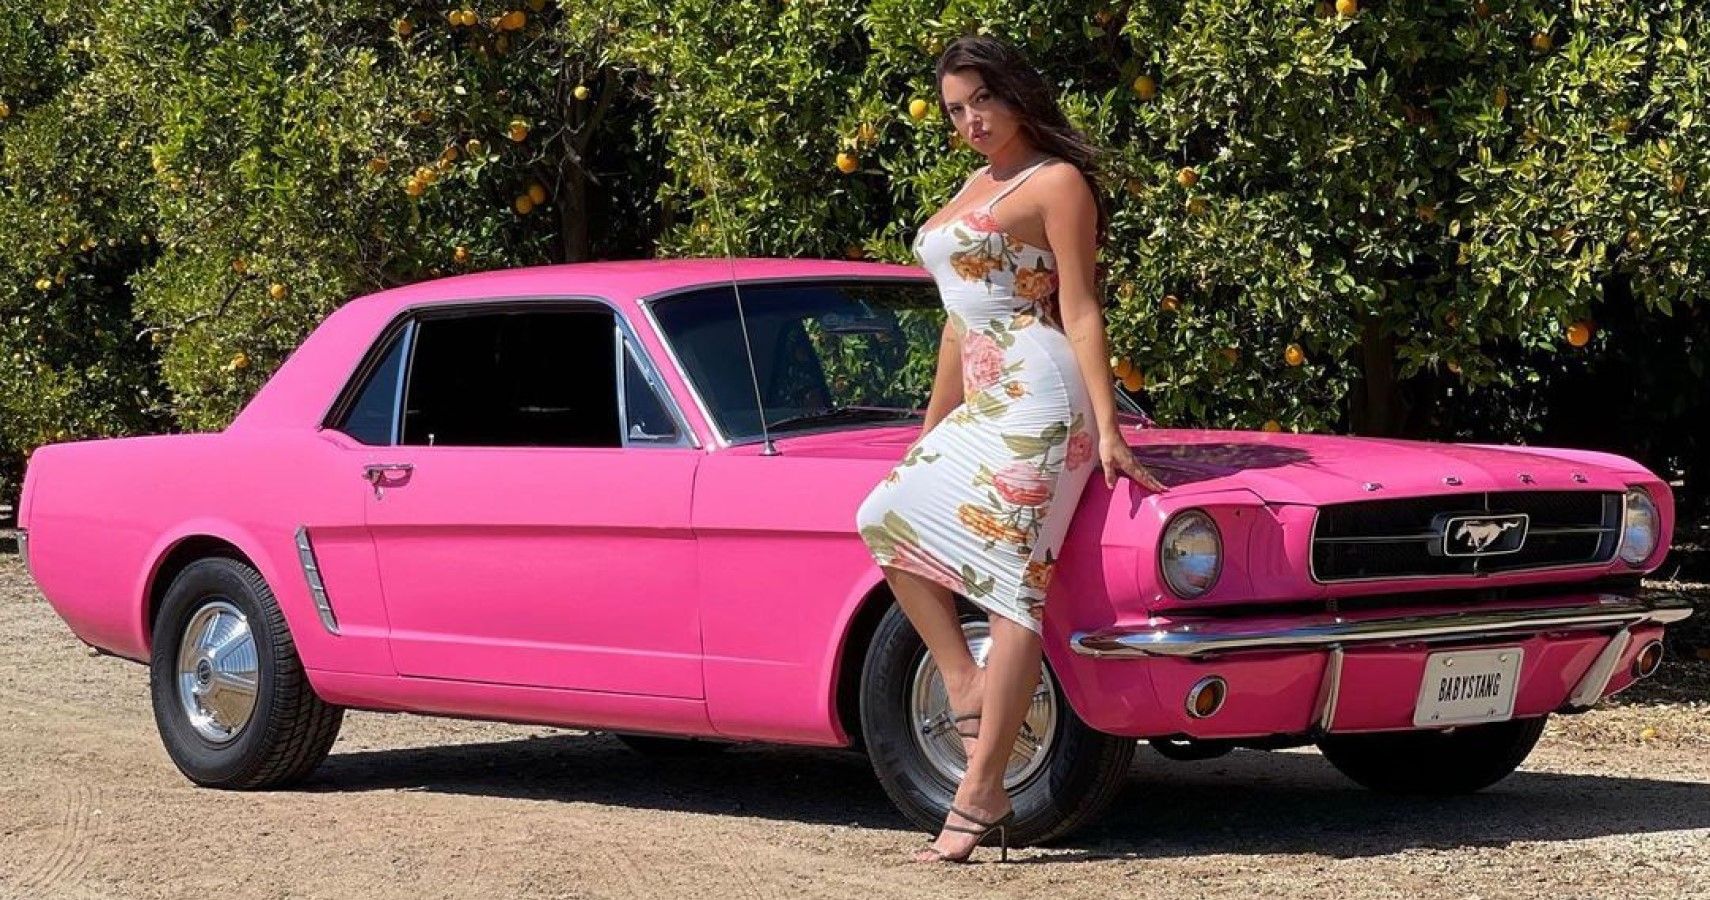 Check Out Constance Nunes’ Very Pink Ford Mustang